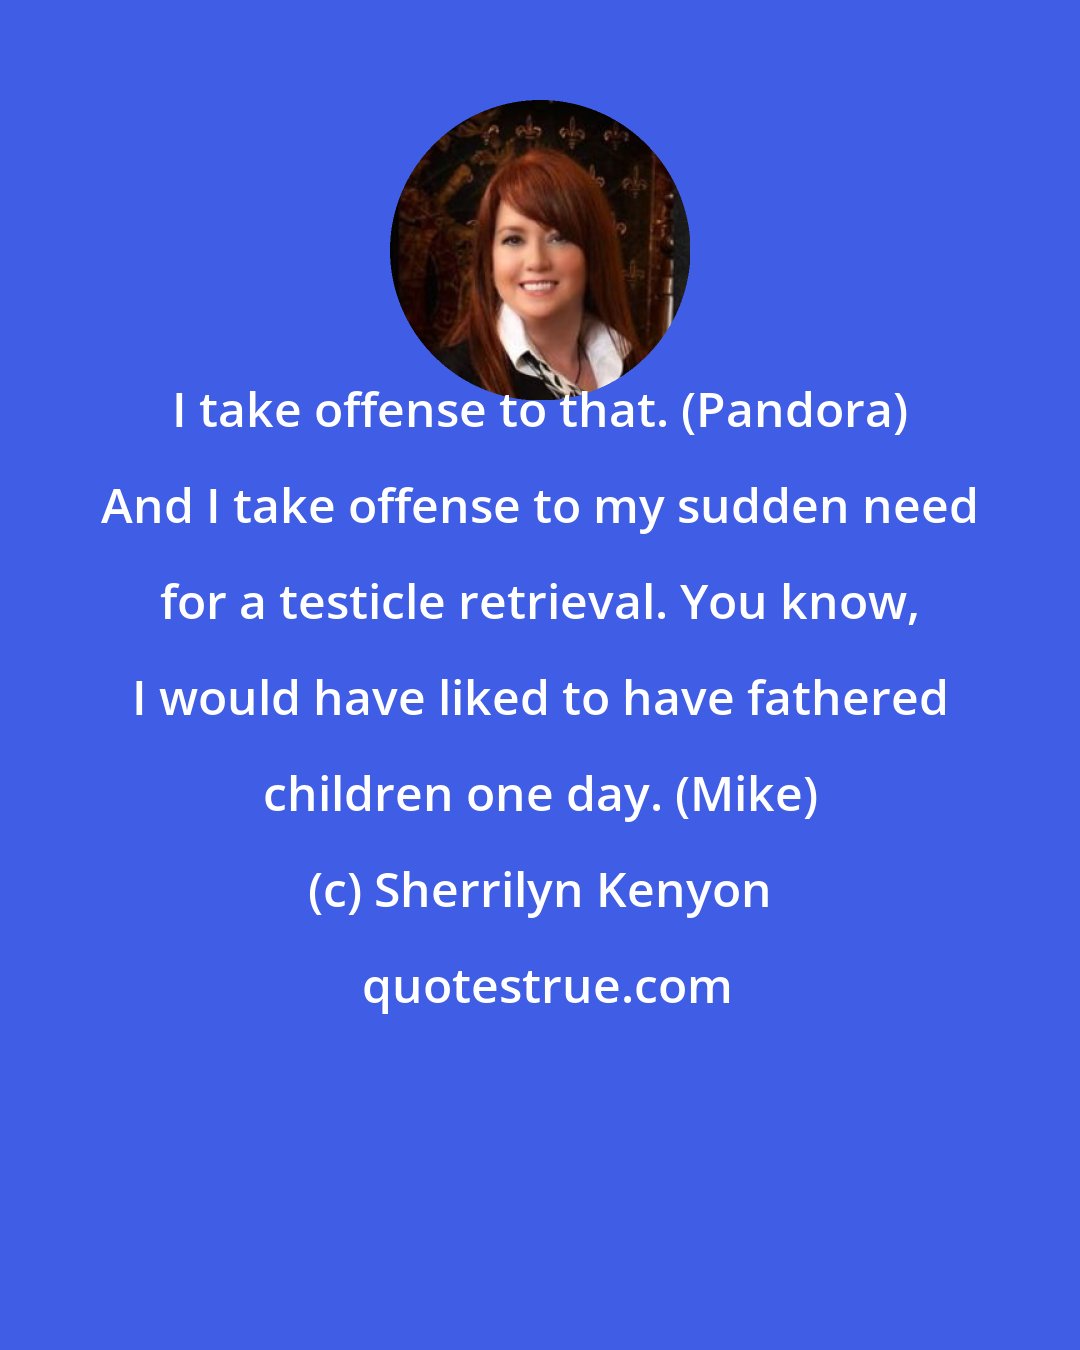 Sherrilyn Kenyon: I take offense to that. (Pandora) And I take offense to my sudden need for a testicle retrieval. You know, I would have liked to have fathered children one day. (Mike)